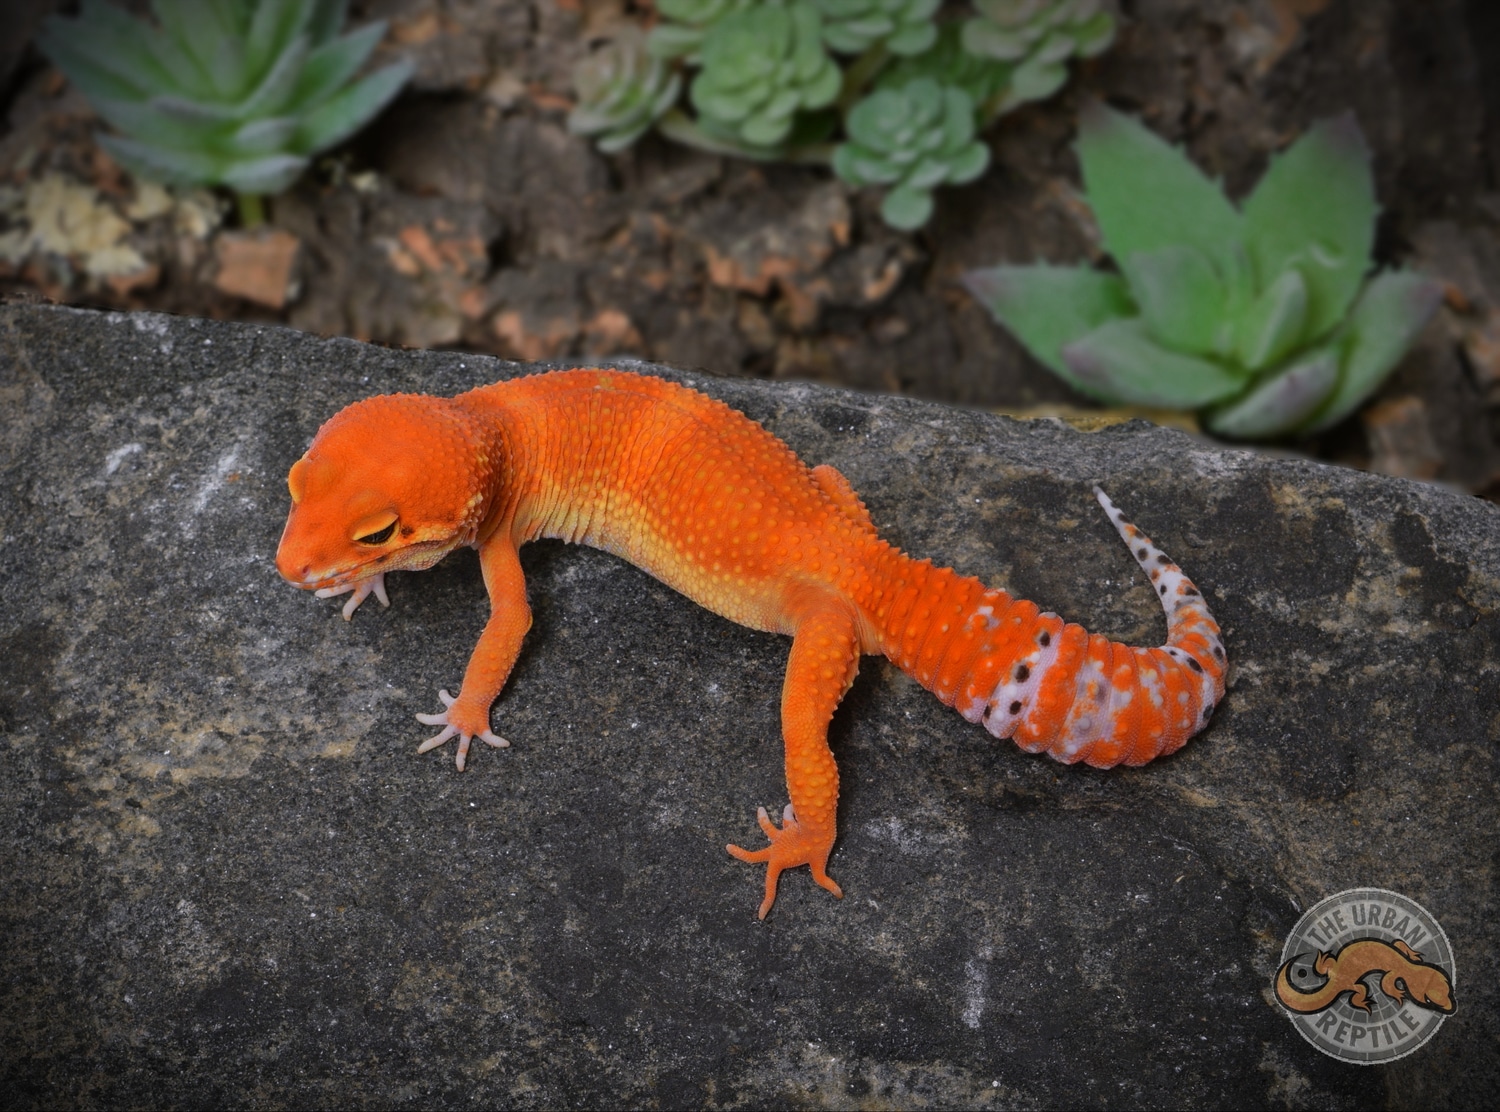 Electric Tangerine Leopard Gecko by The Urban Reptile